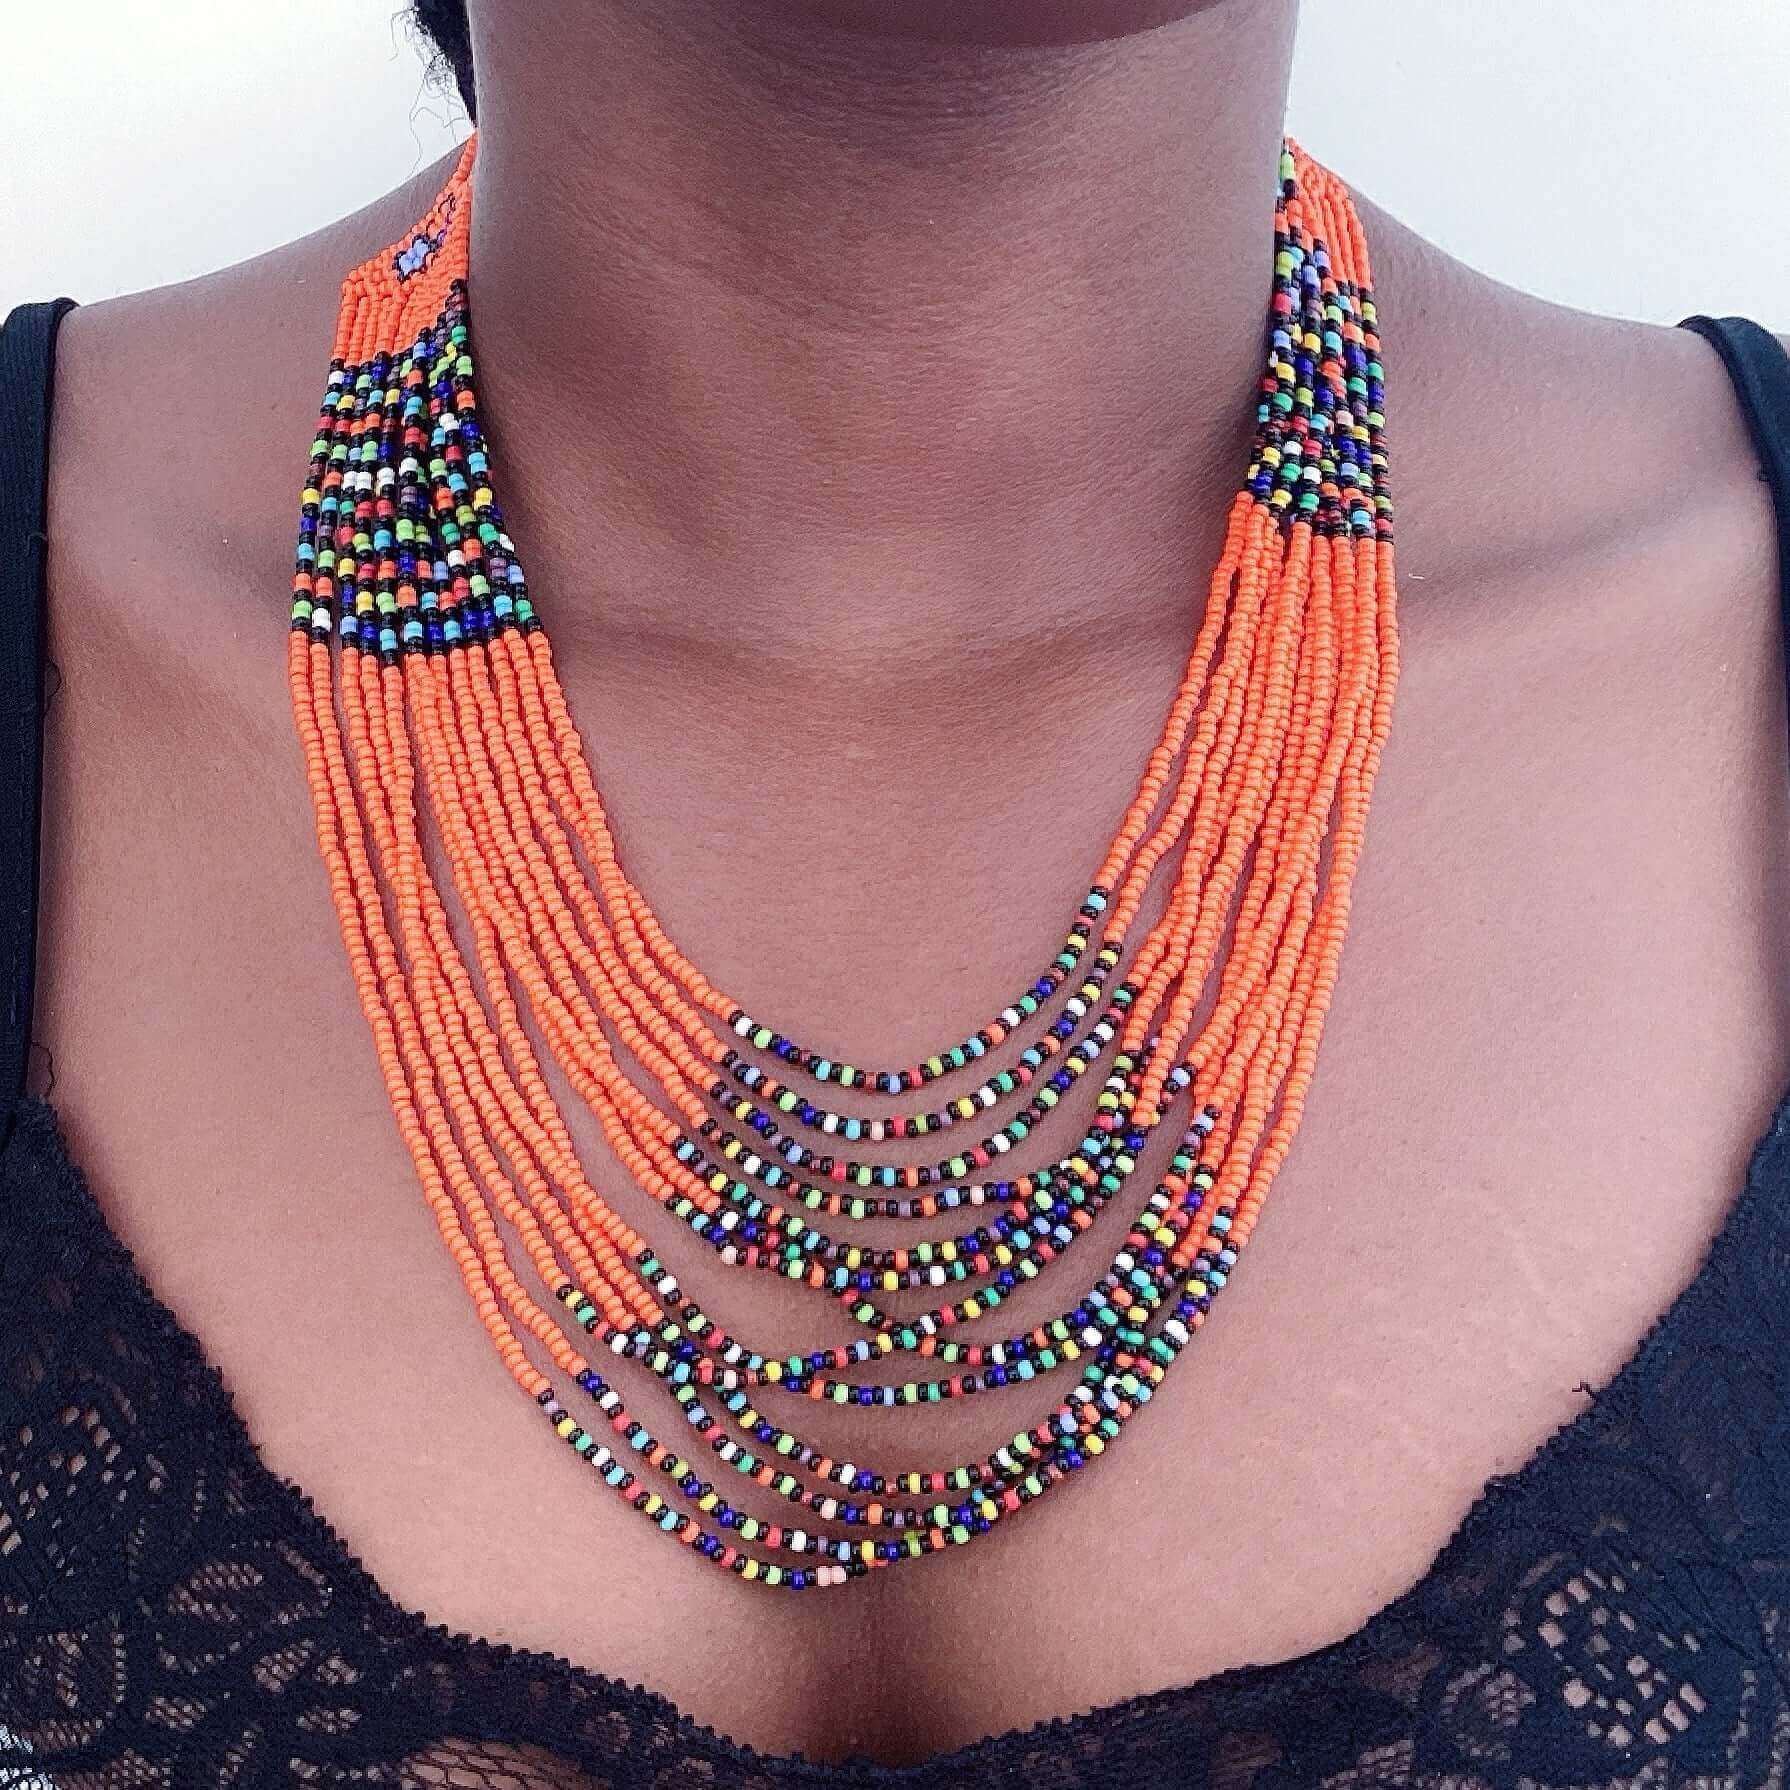 View of multi strand zulu beaded necklace in bands of orange and multi mix colors.